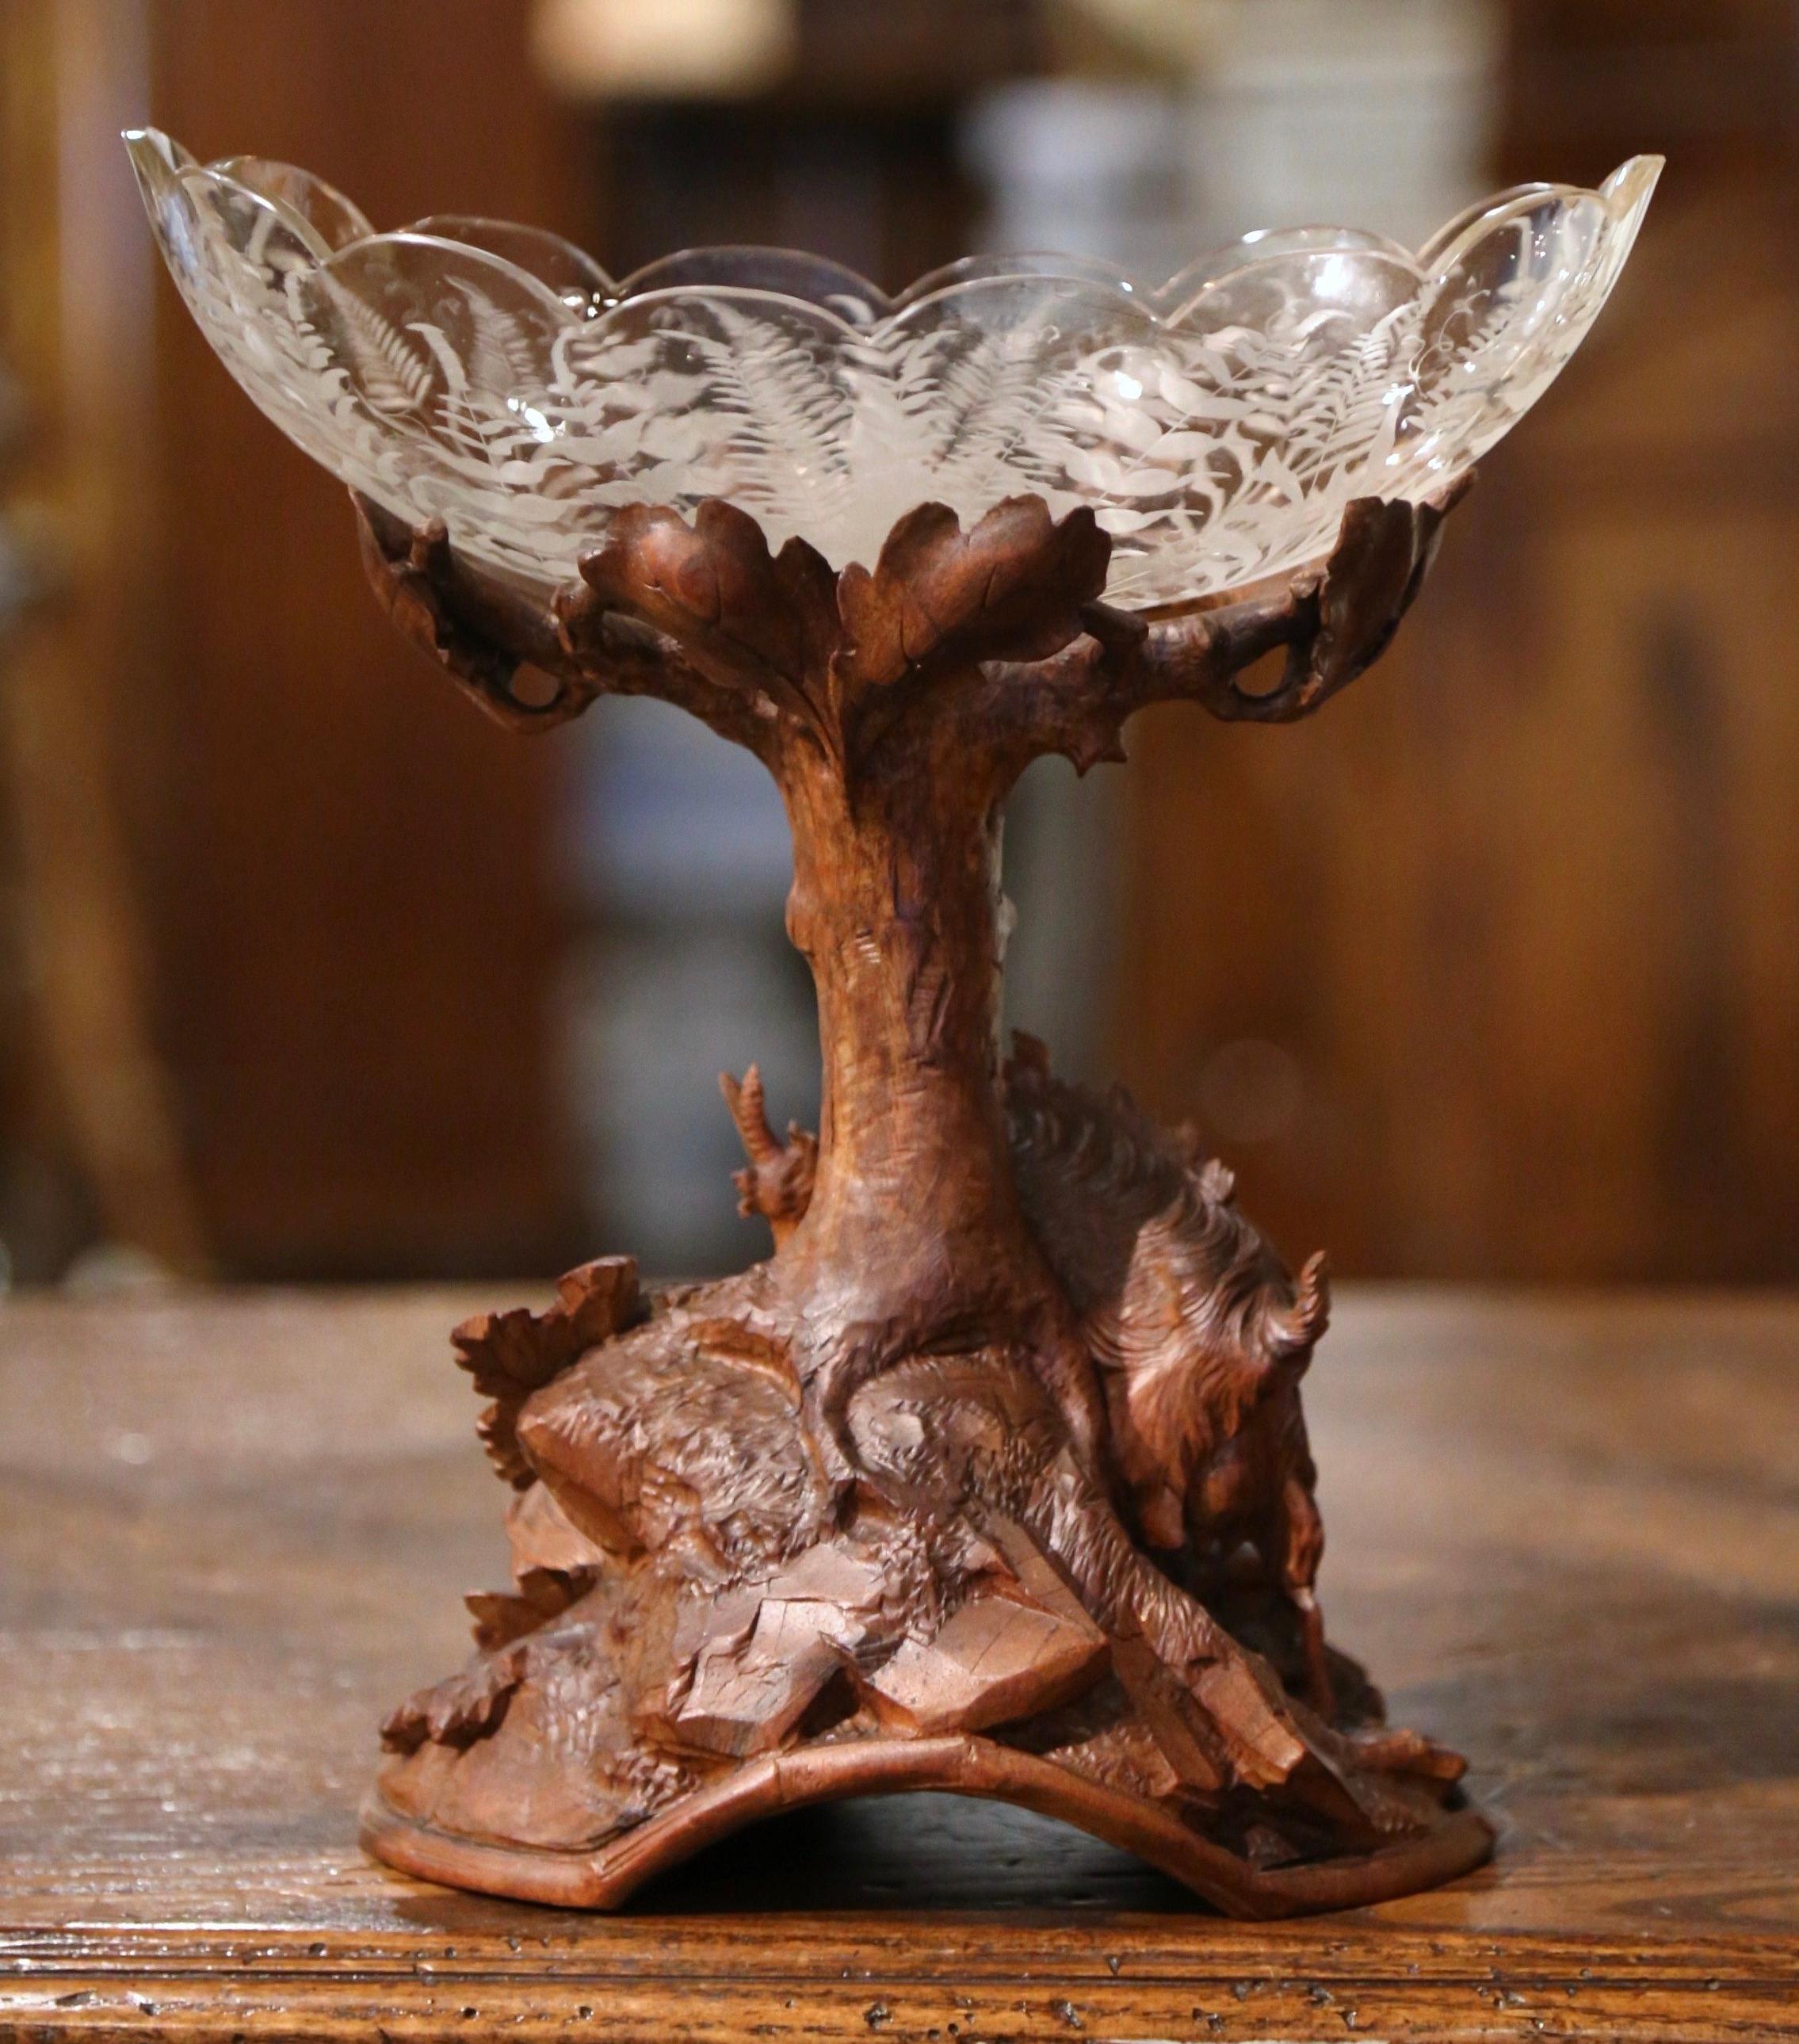 19th Century Black Forest Carved Walnut and Crystal Center Piece with Goat Decor For Sale 3